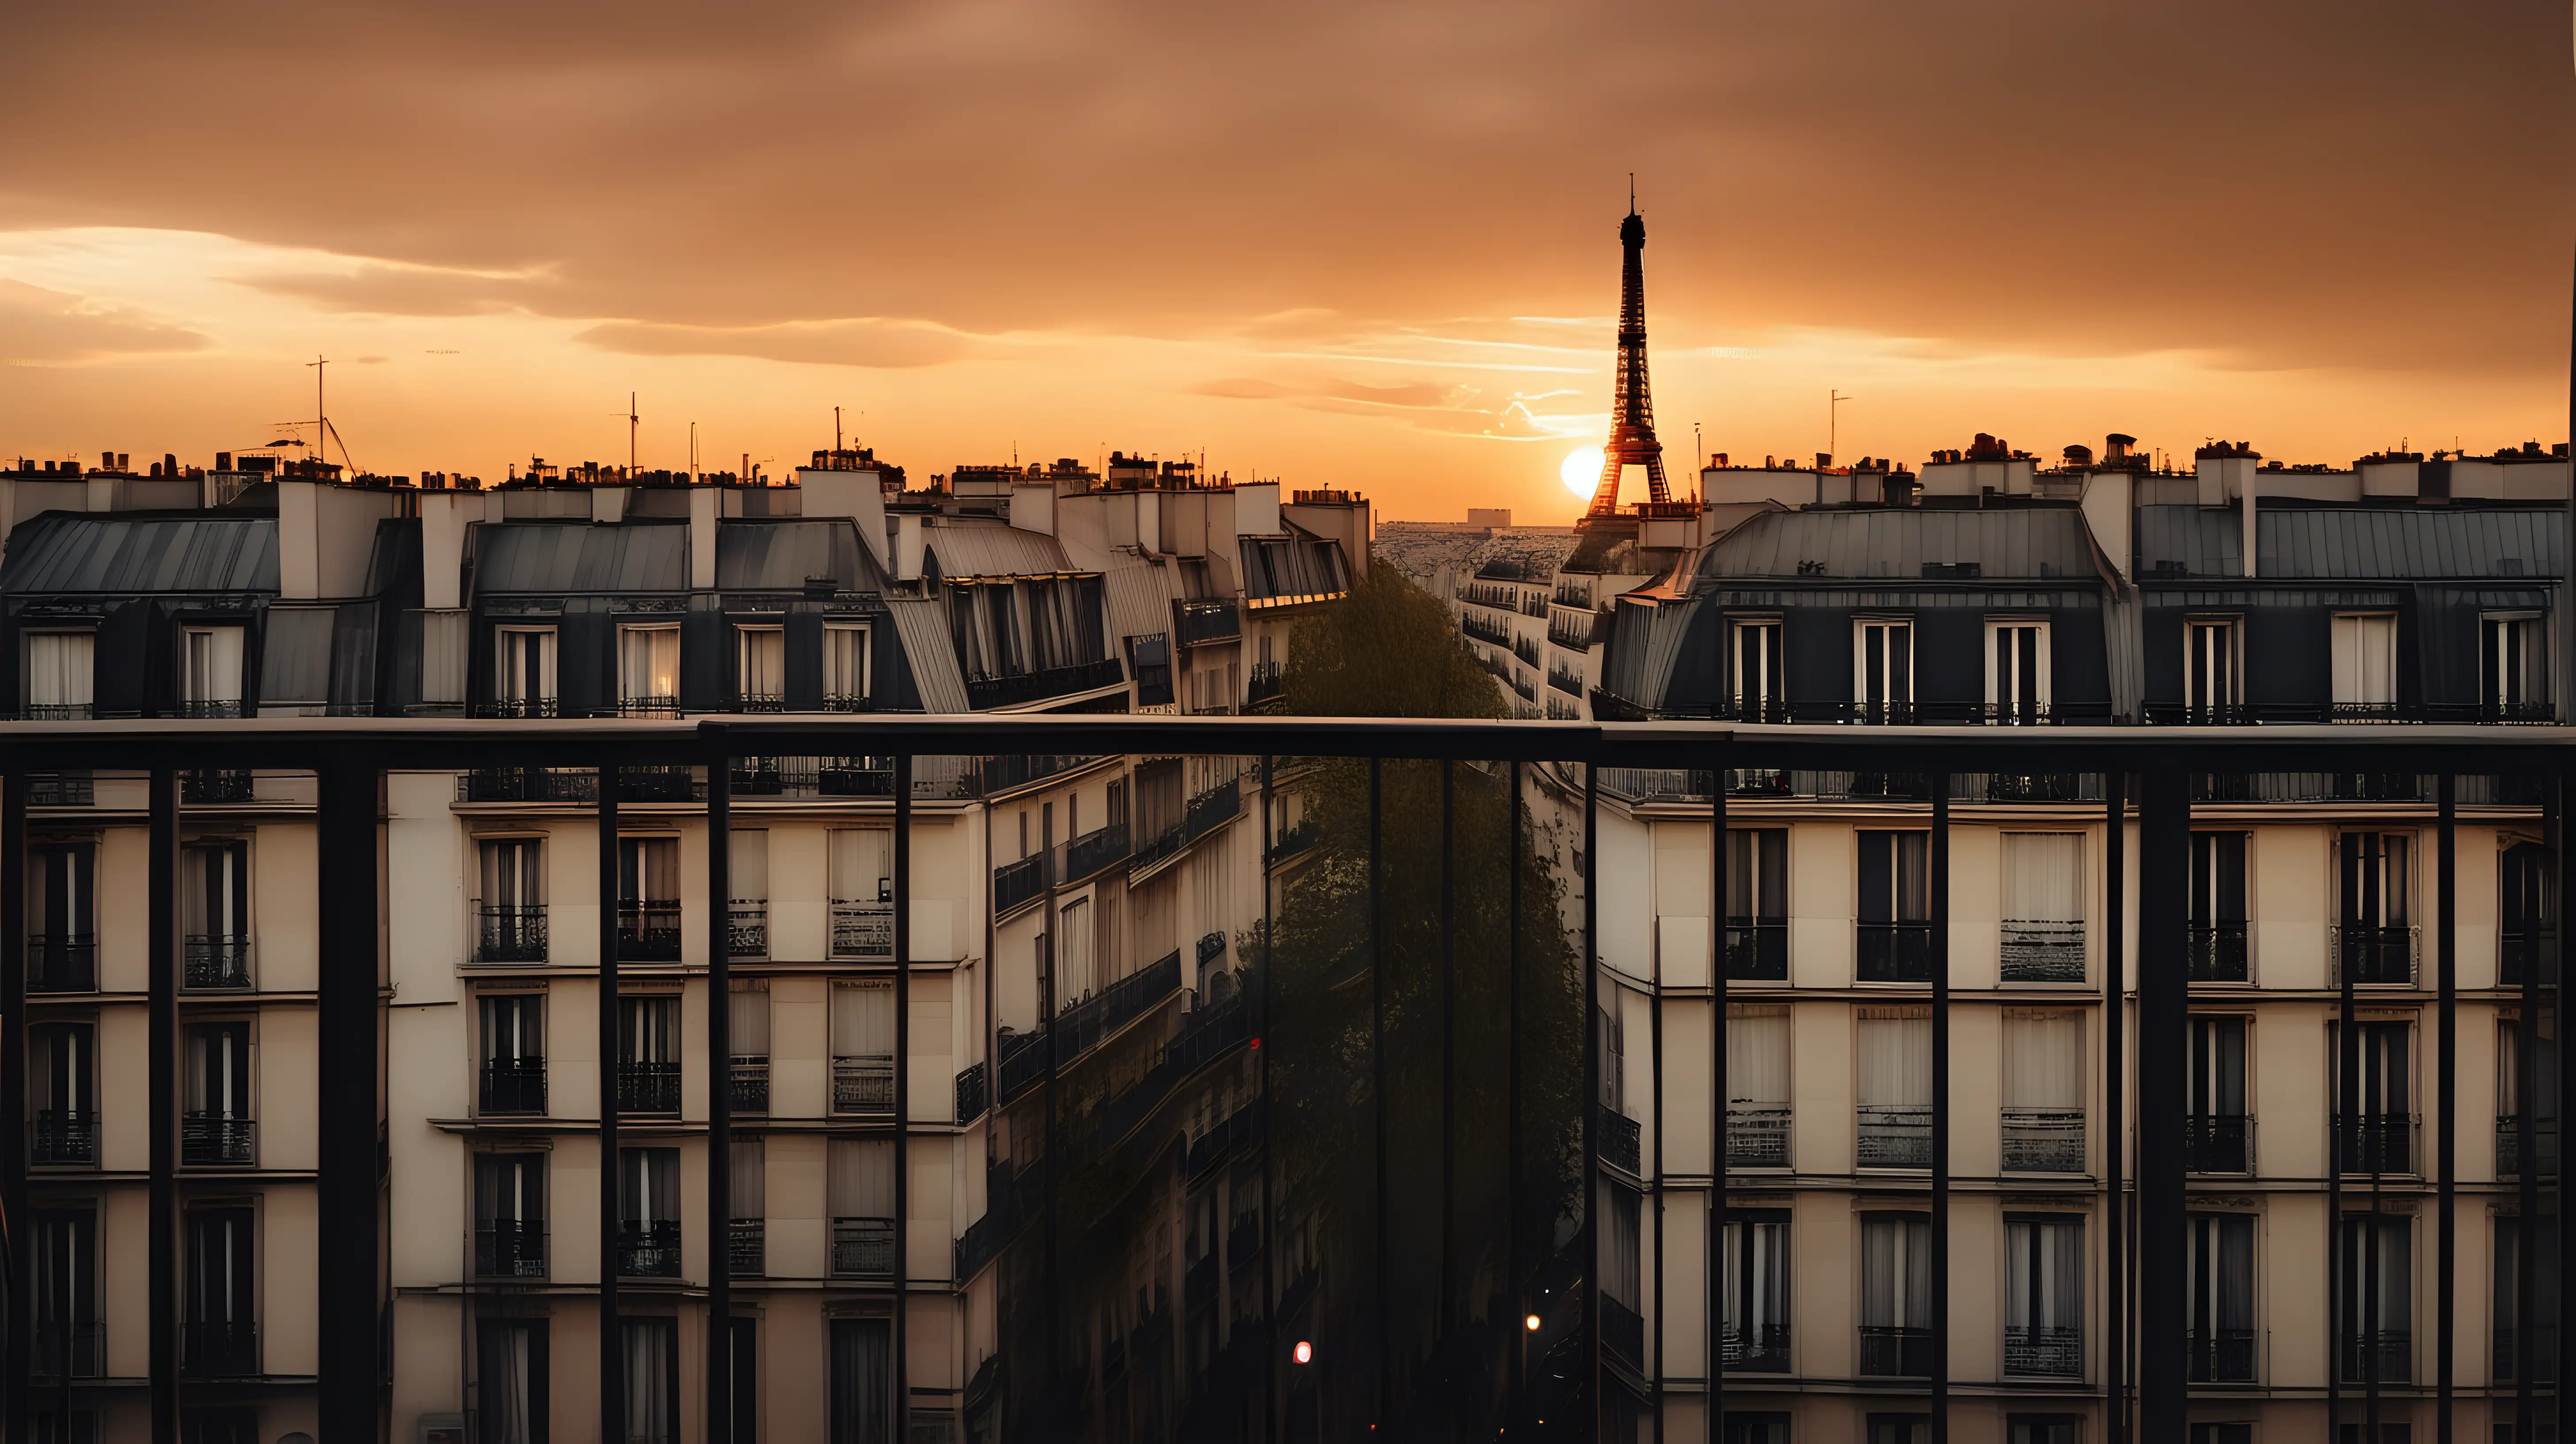 A Paris city sunset, viewed from a balcony, cinematic lighting, photographic quality.